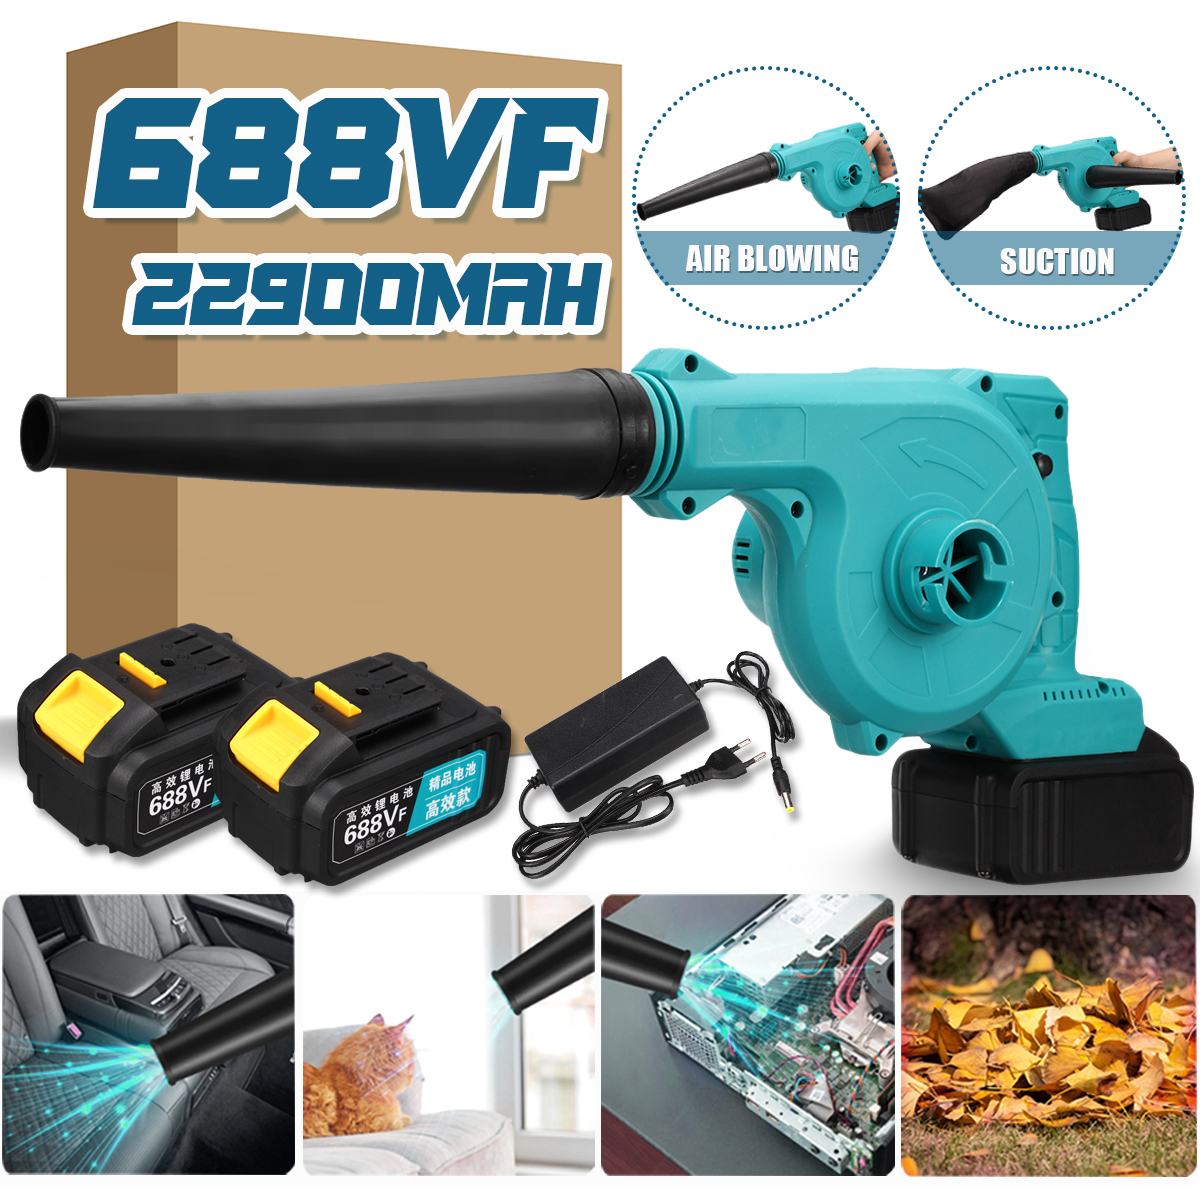 688VF-54-KPA-Brushless-Air-Blower-Suction-Cleaner-Power-Indicator-Cordless-Electric-Air-Blower--Suct-1855376-2